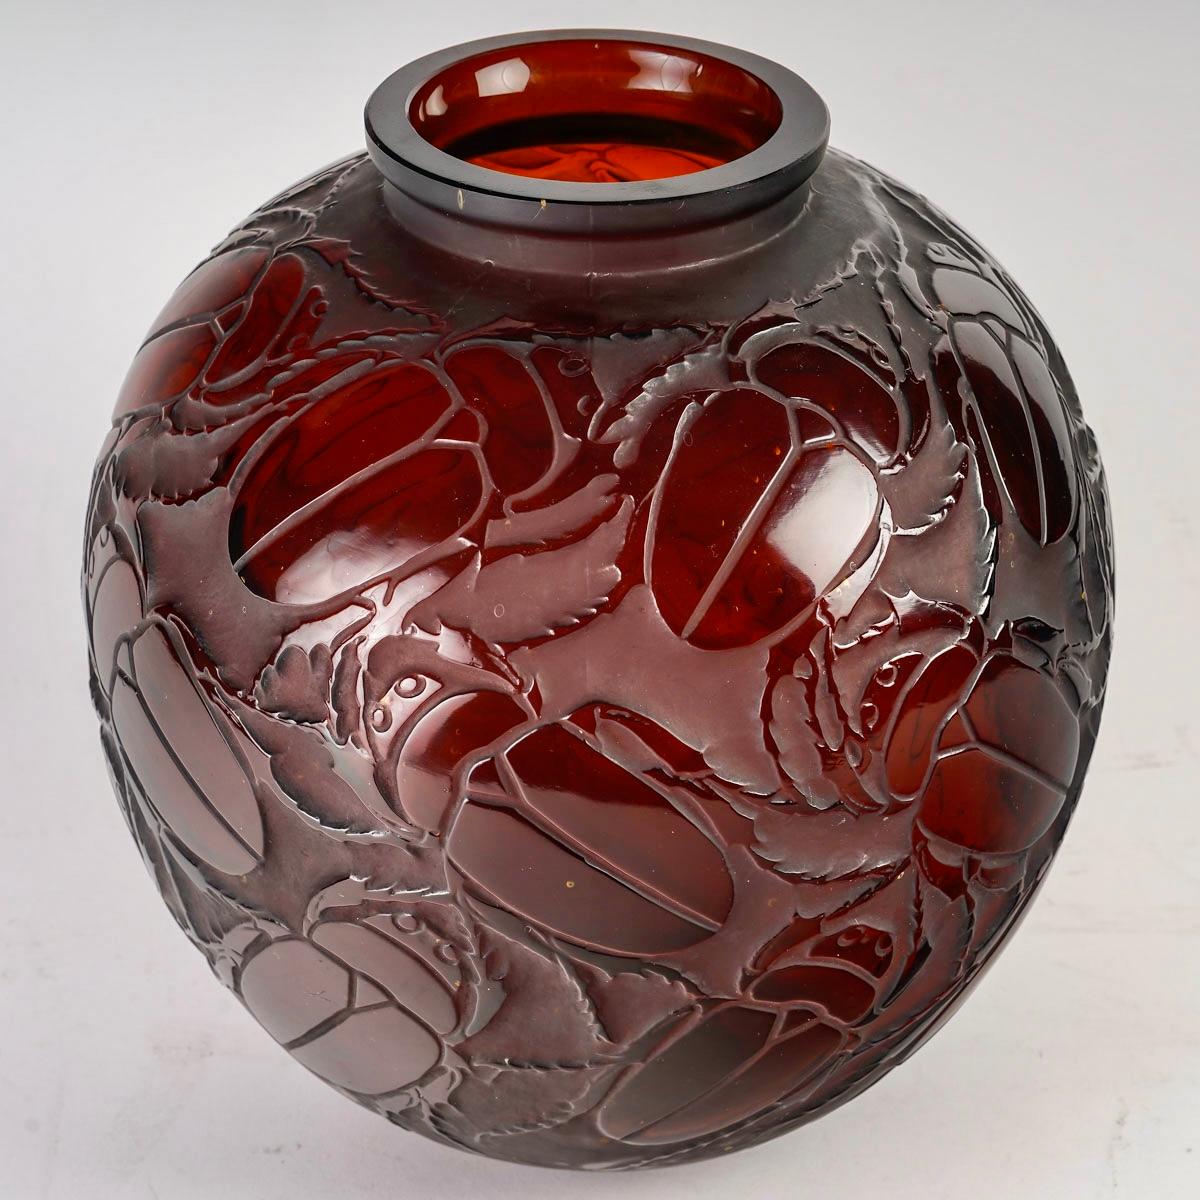 Art Deco 1923 Rene Lalique - Vase Gros Scarabees Red Amber Glass Beetles For Sale